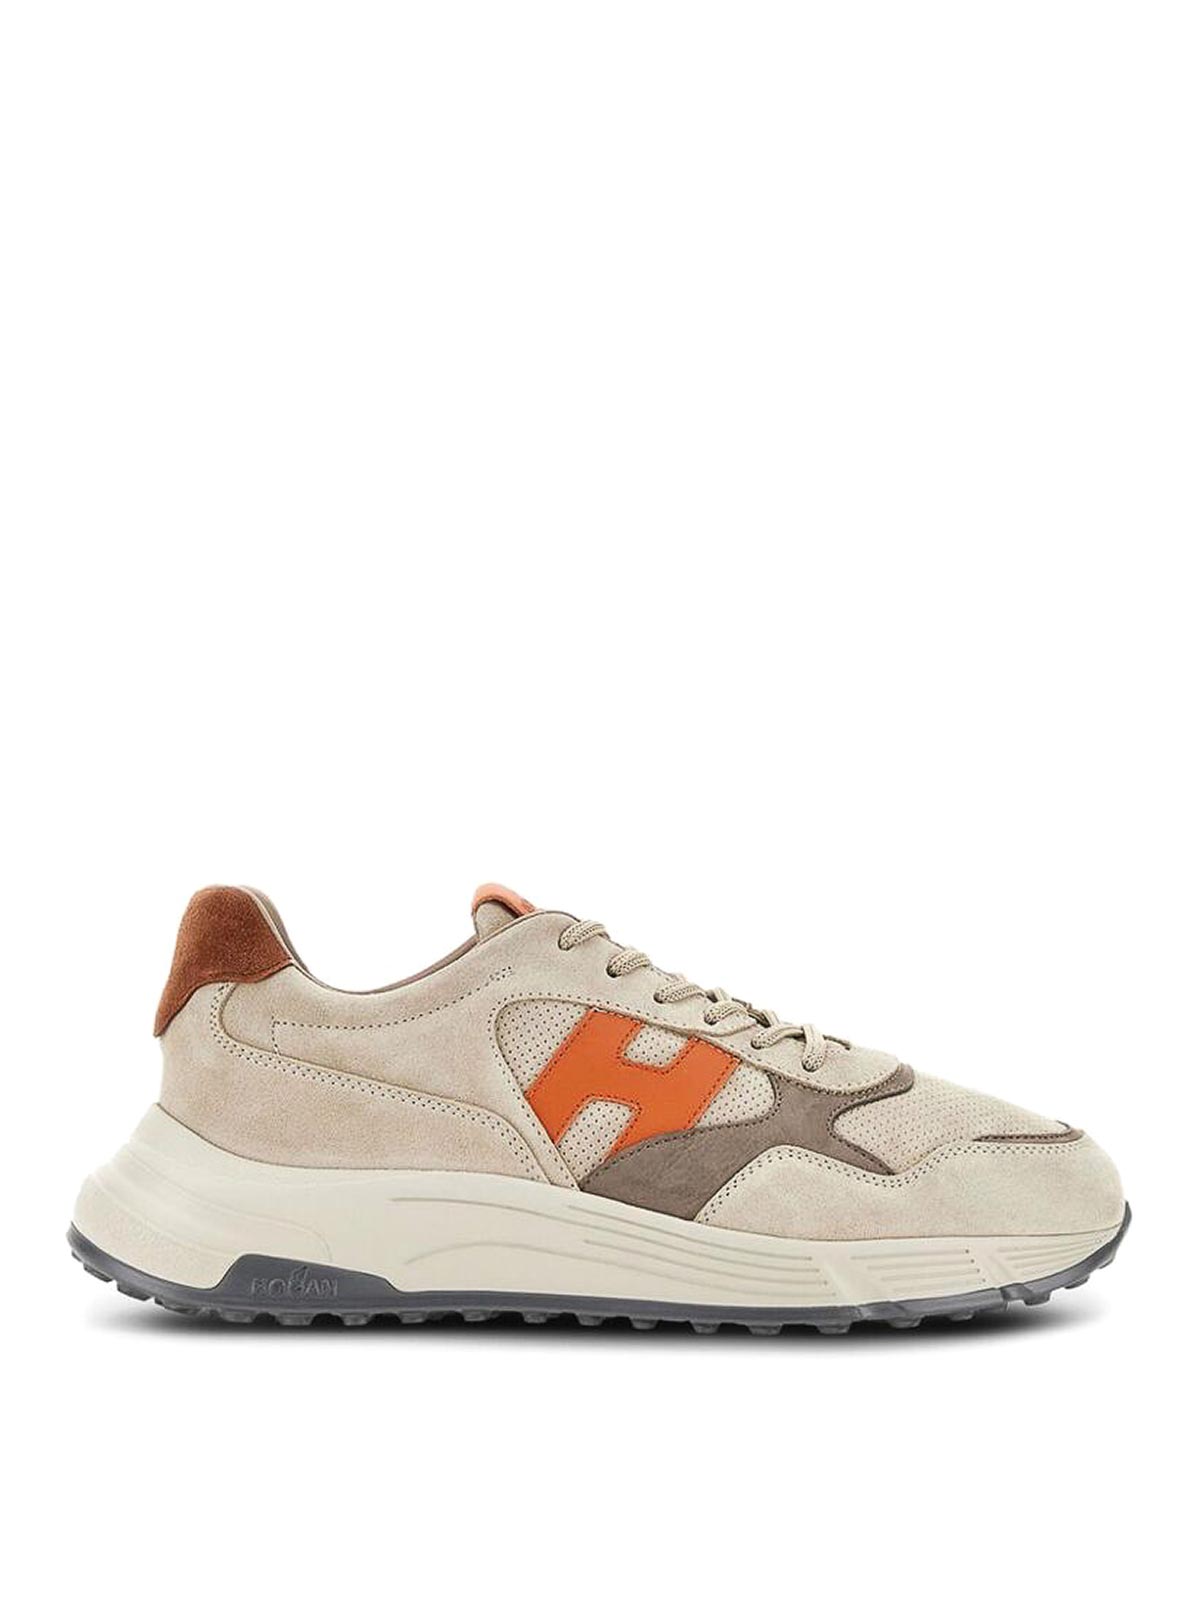 HOGAN HYPERLIGHT PANELLED LACE-UP SNEAKERS